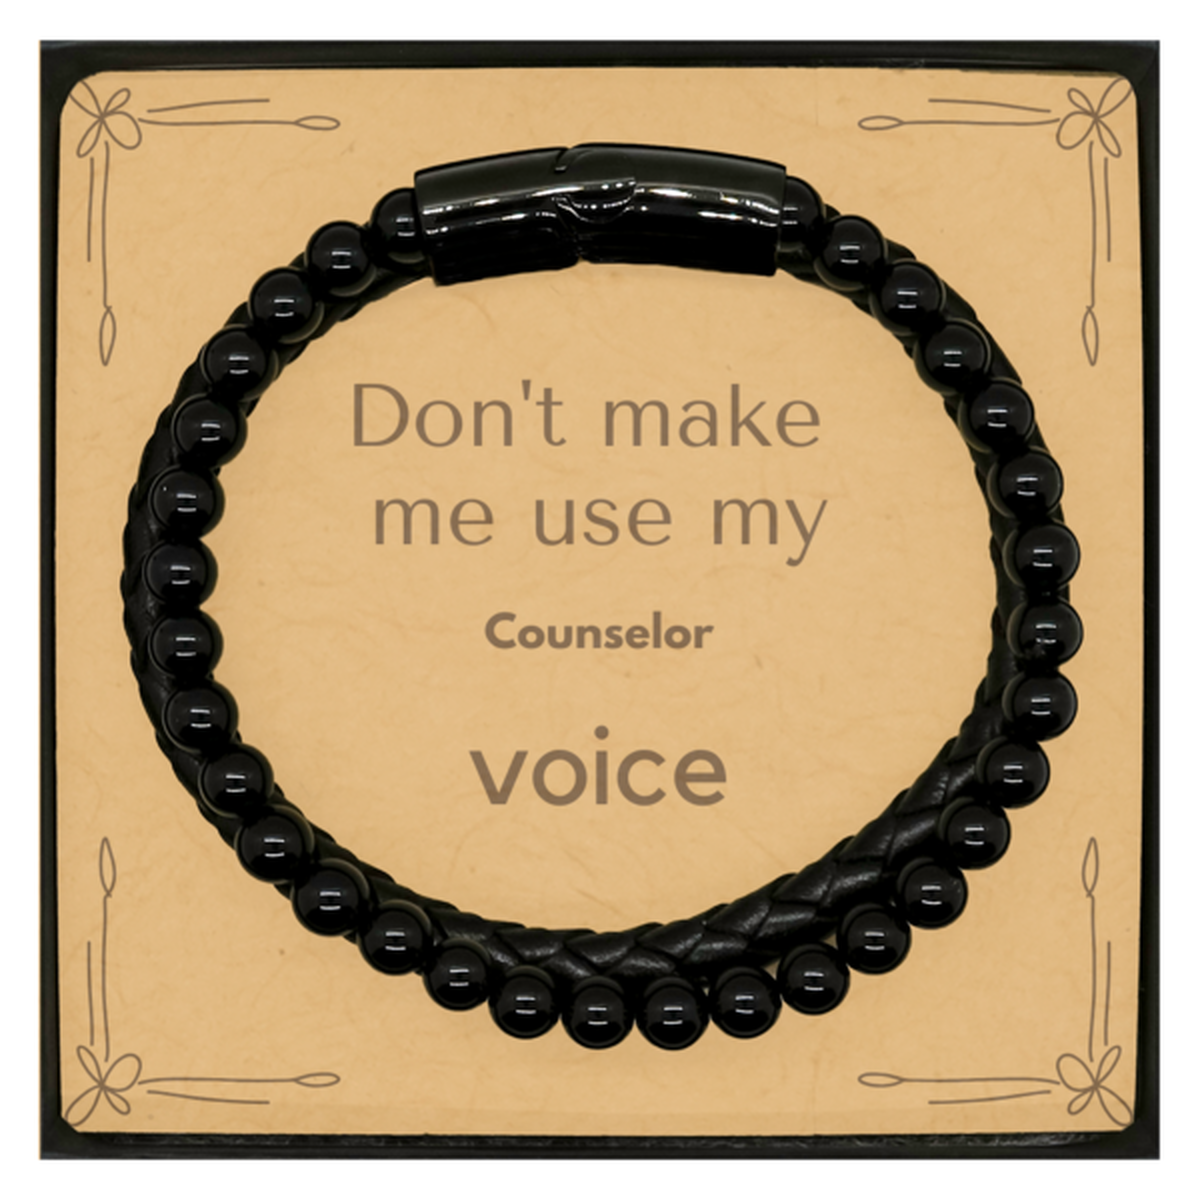 Don't make me use my Counselor voice, Sarcasm Counselor Card Gifts, Christmas Counselor Stone Leather Bracelets Birthday Unique Gifts For Counselor Coworkers, Men, Women, Colleague, Friends